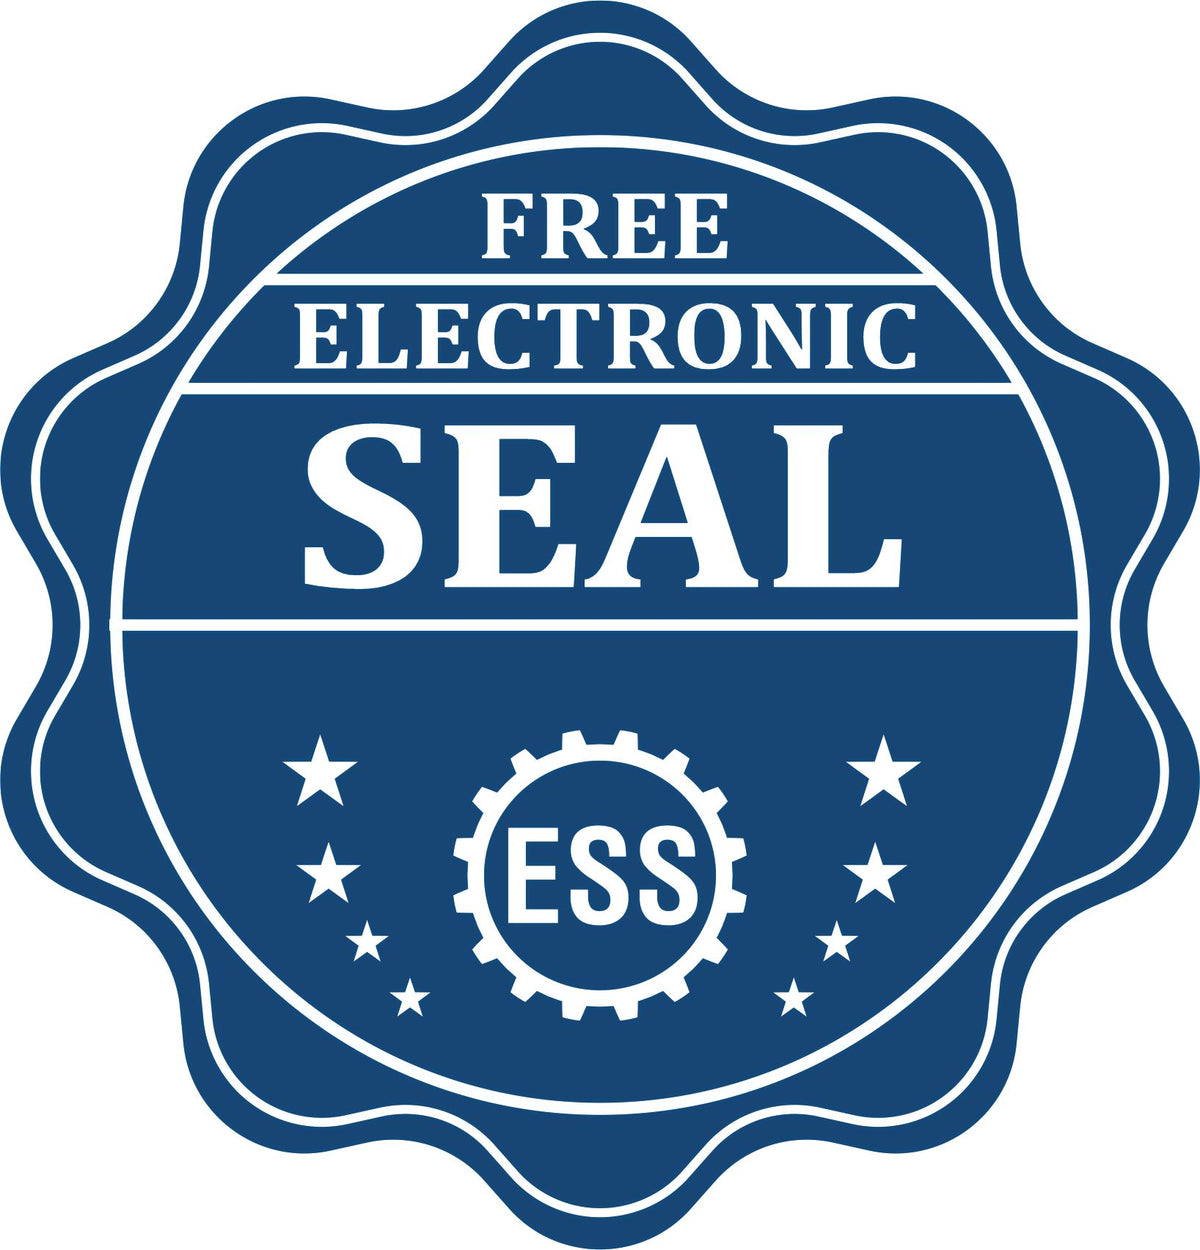 A badge showing a free electronic seal for the Gift Alabama Architect Seal with stars and the ESS gear on the emblem.